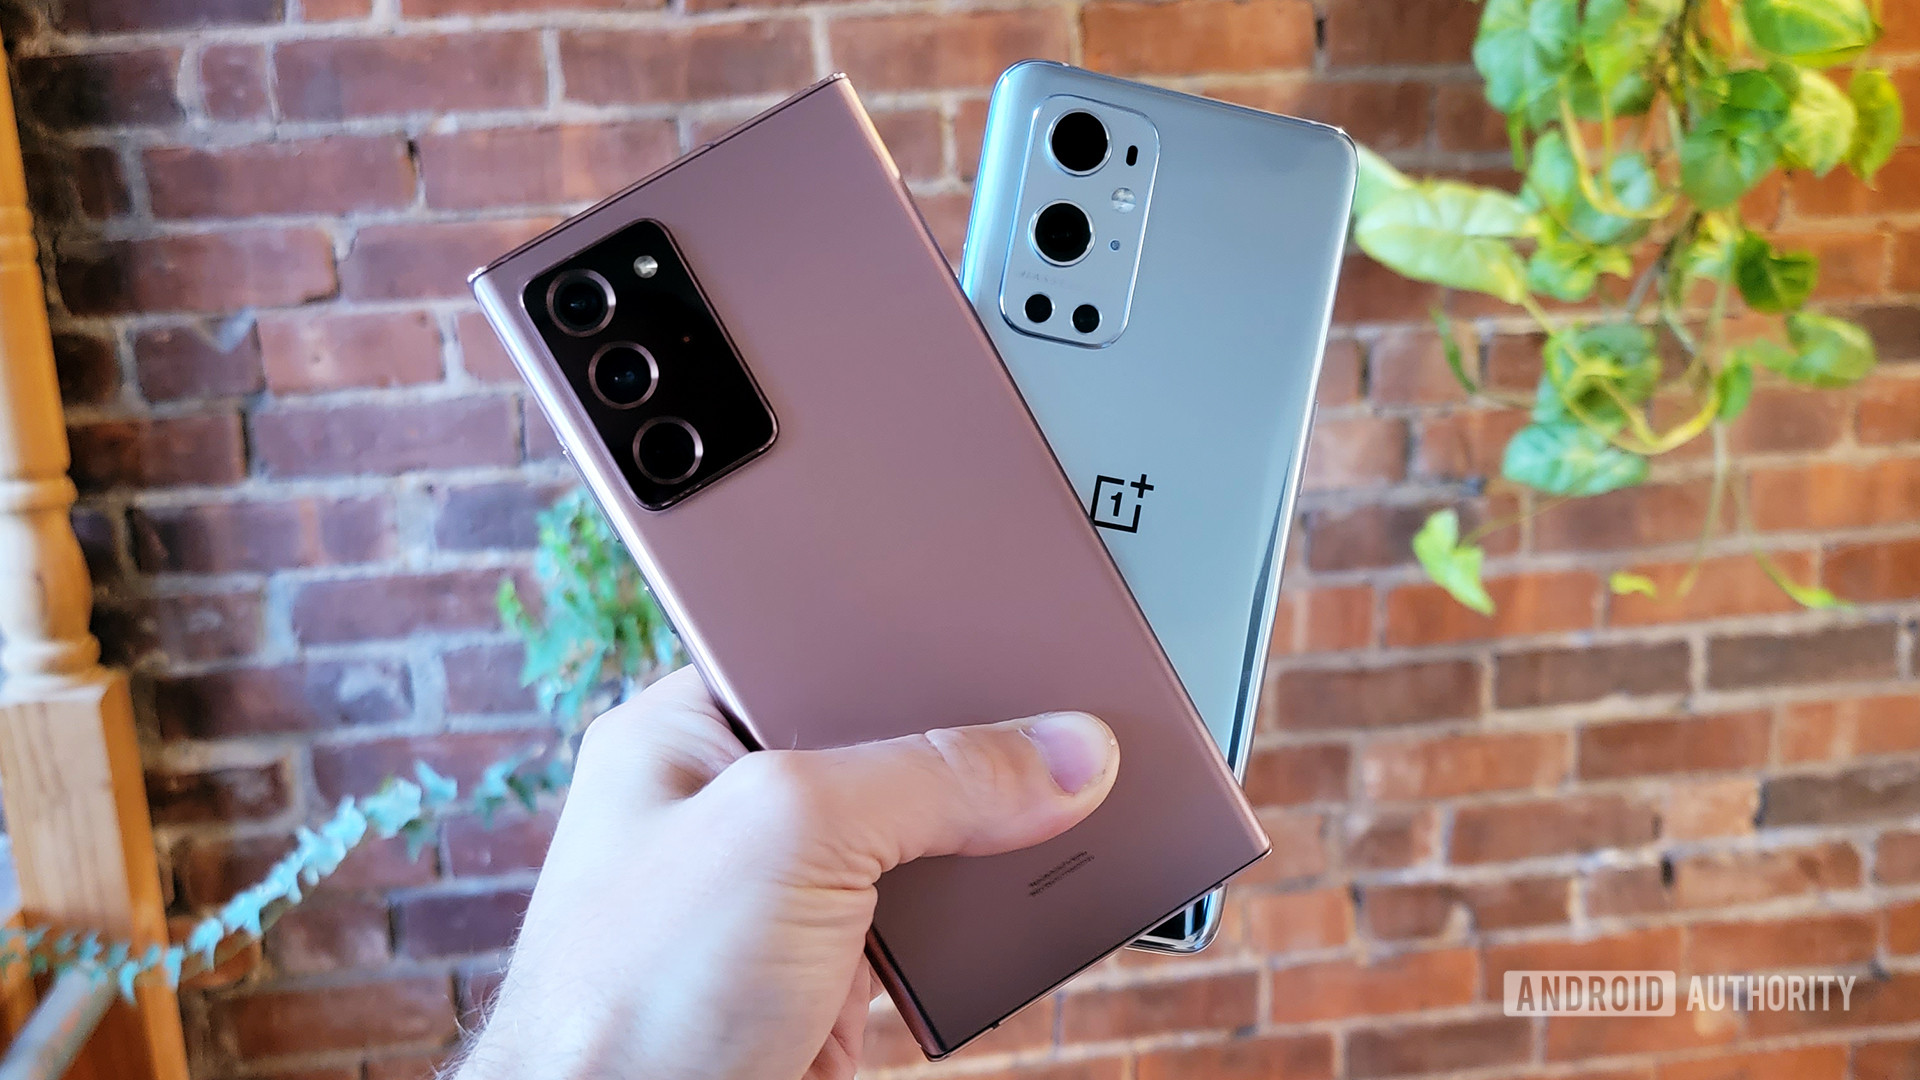 A samsung galaxy note 20 ultra and oneplus 9 pro in a person's hand